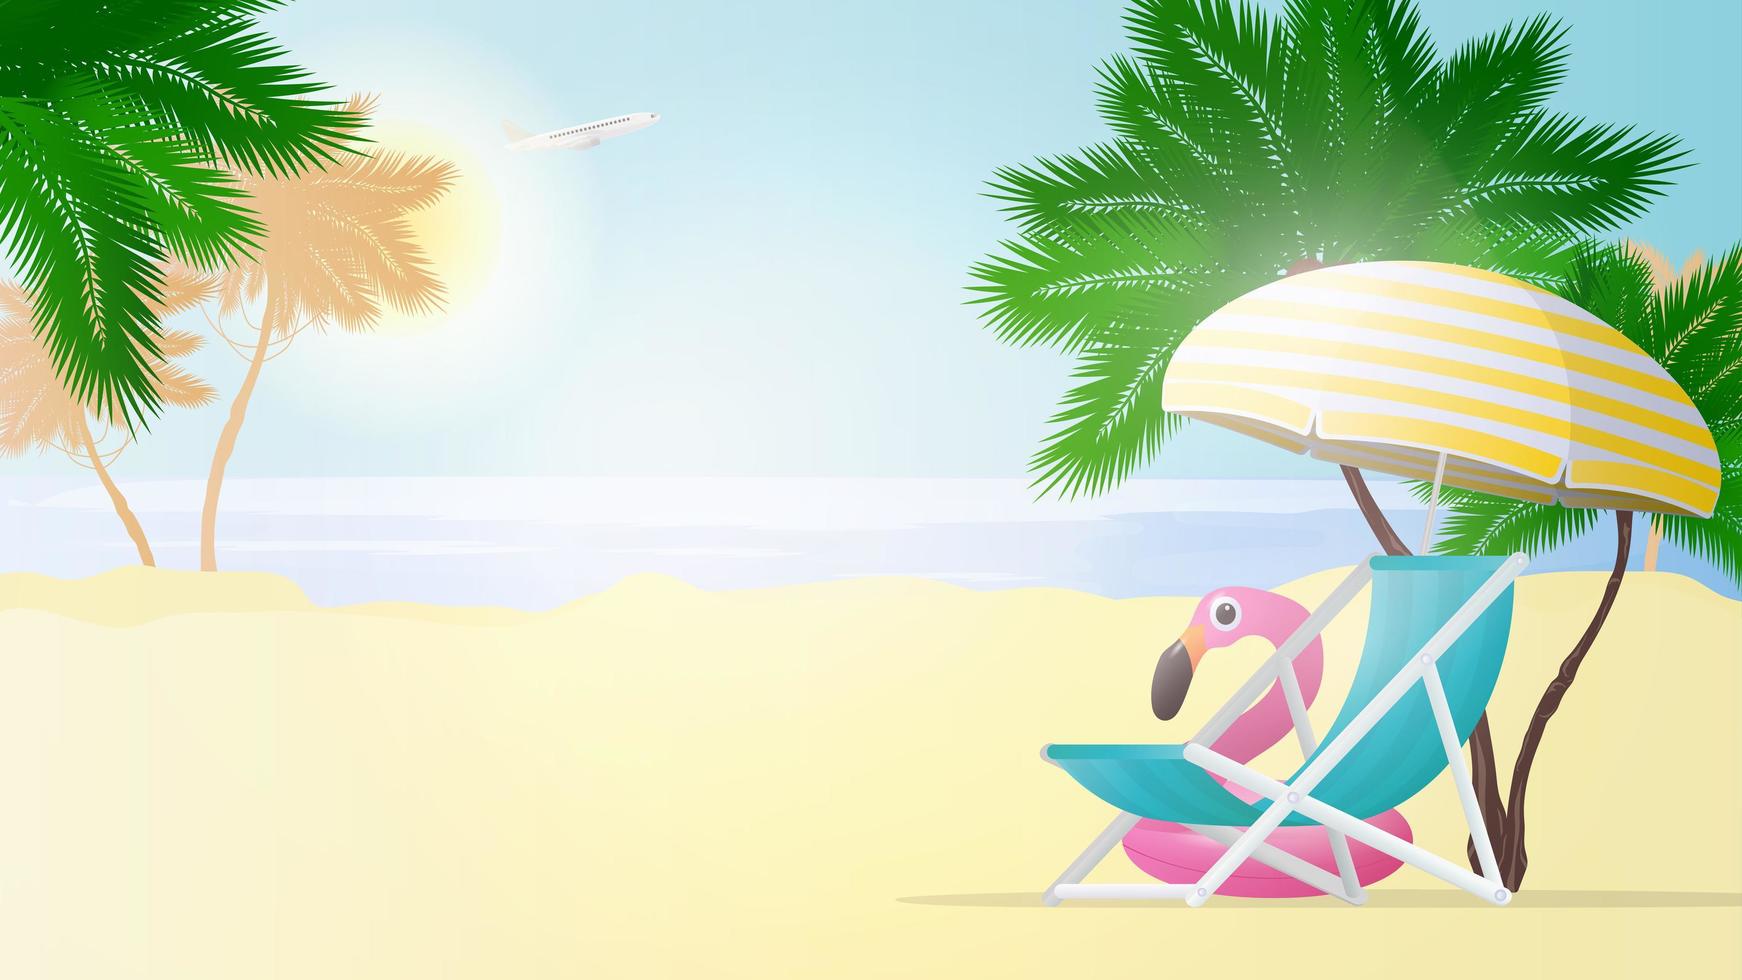 Vector illustration of a beach. Beach chair and sun umbrella with yellow stripes. Palm trees and pink flamingo swimming circle.